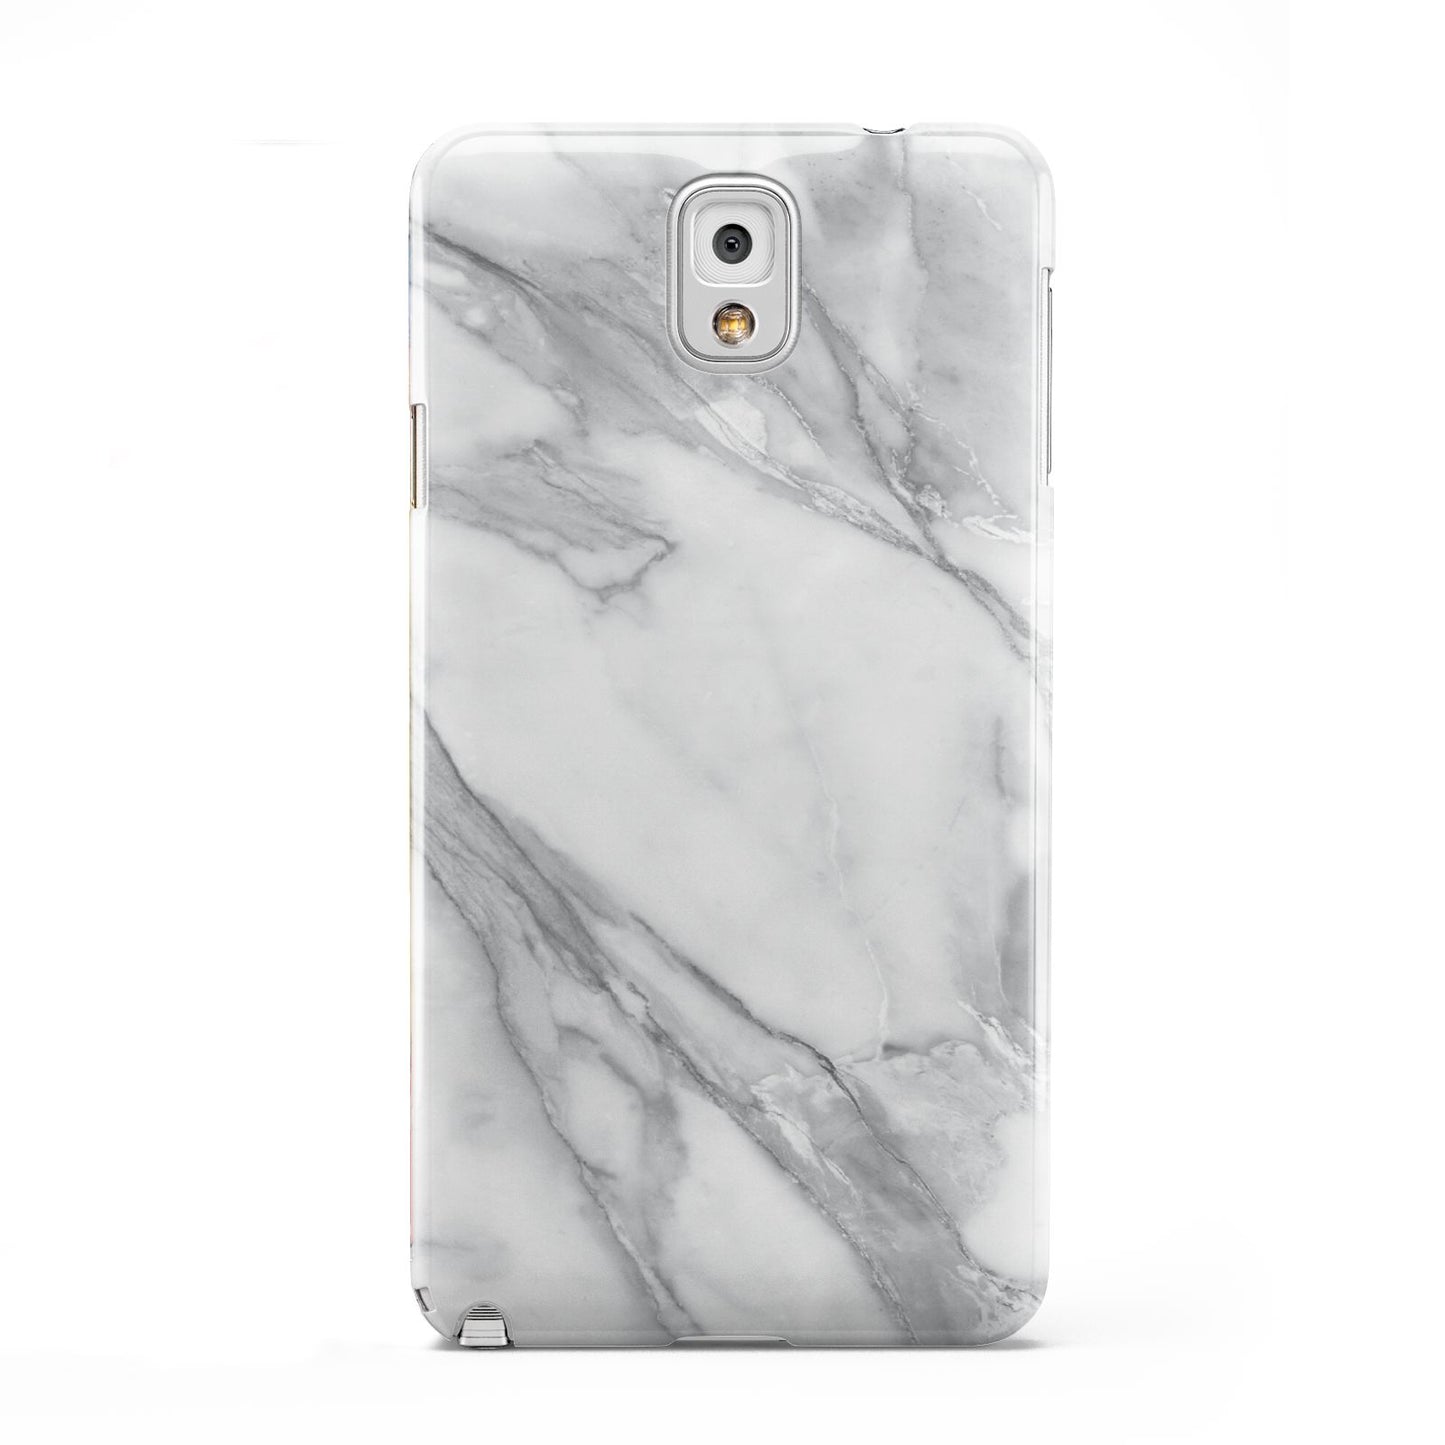 Faux Marble Effect White Grey Samsung Galaxy Note 3 Case